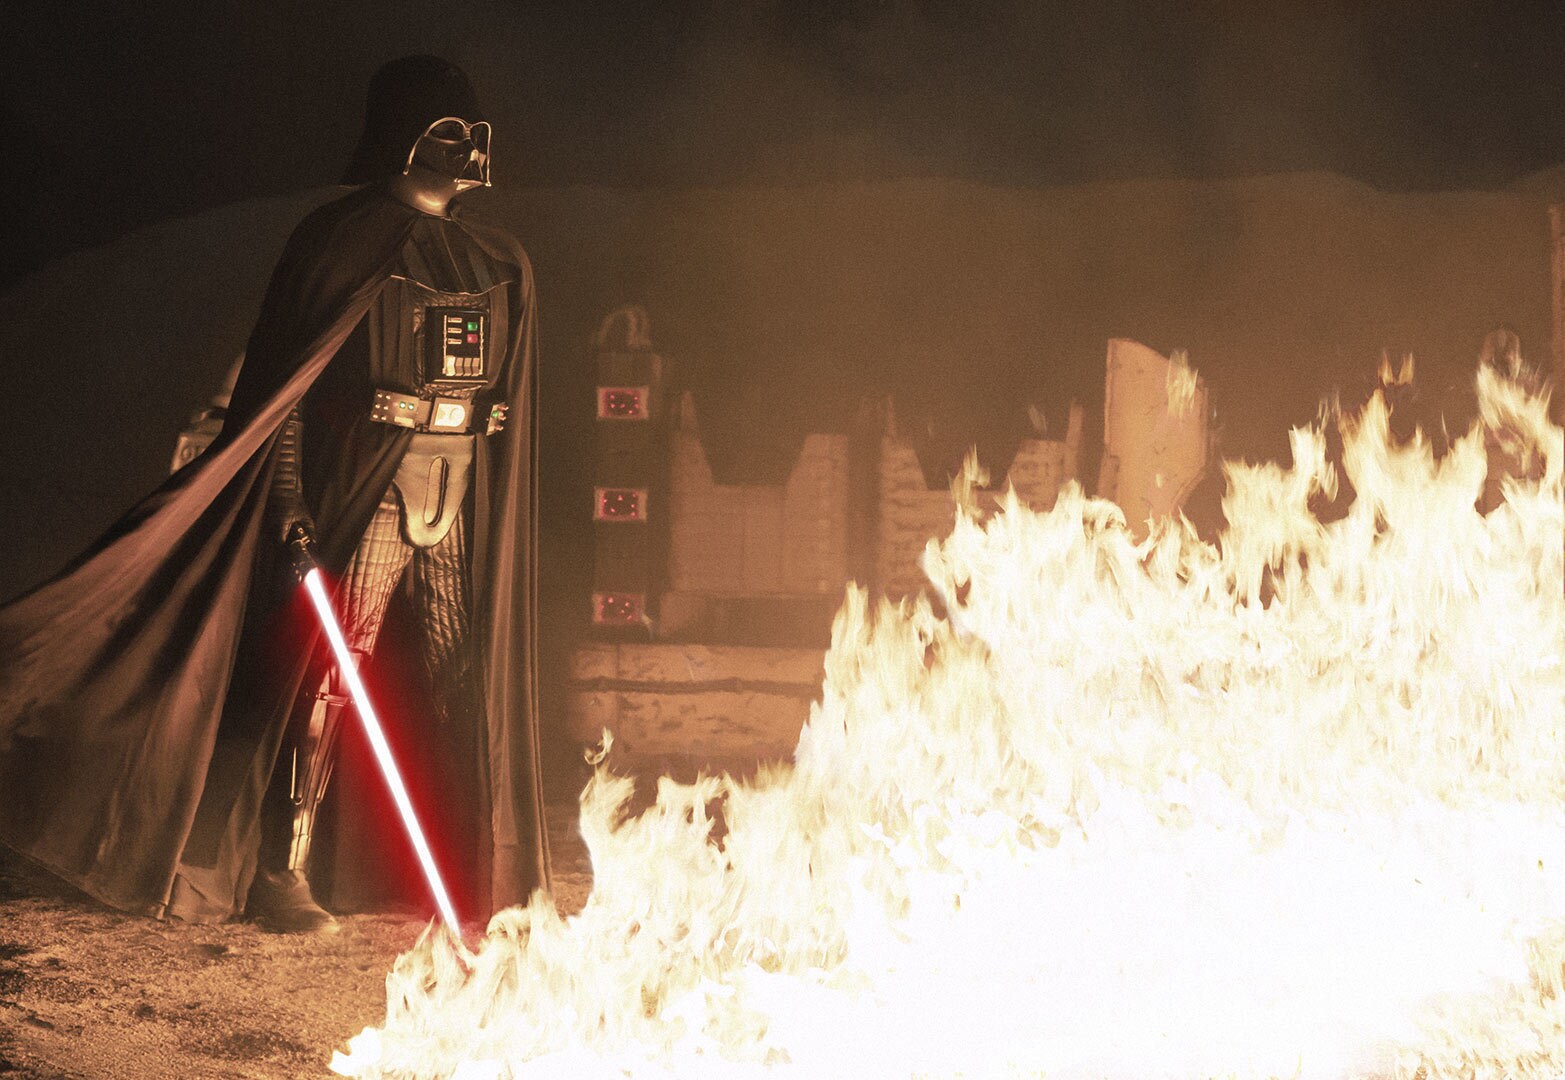 Darth Vader dueling Obi-Wan surrounded by fire